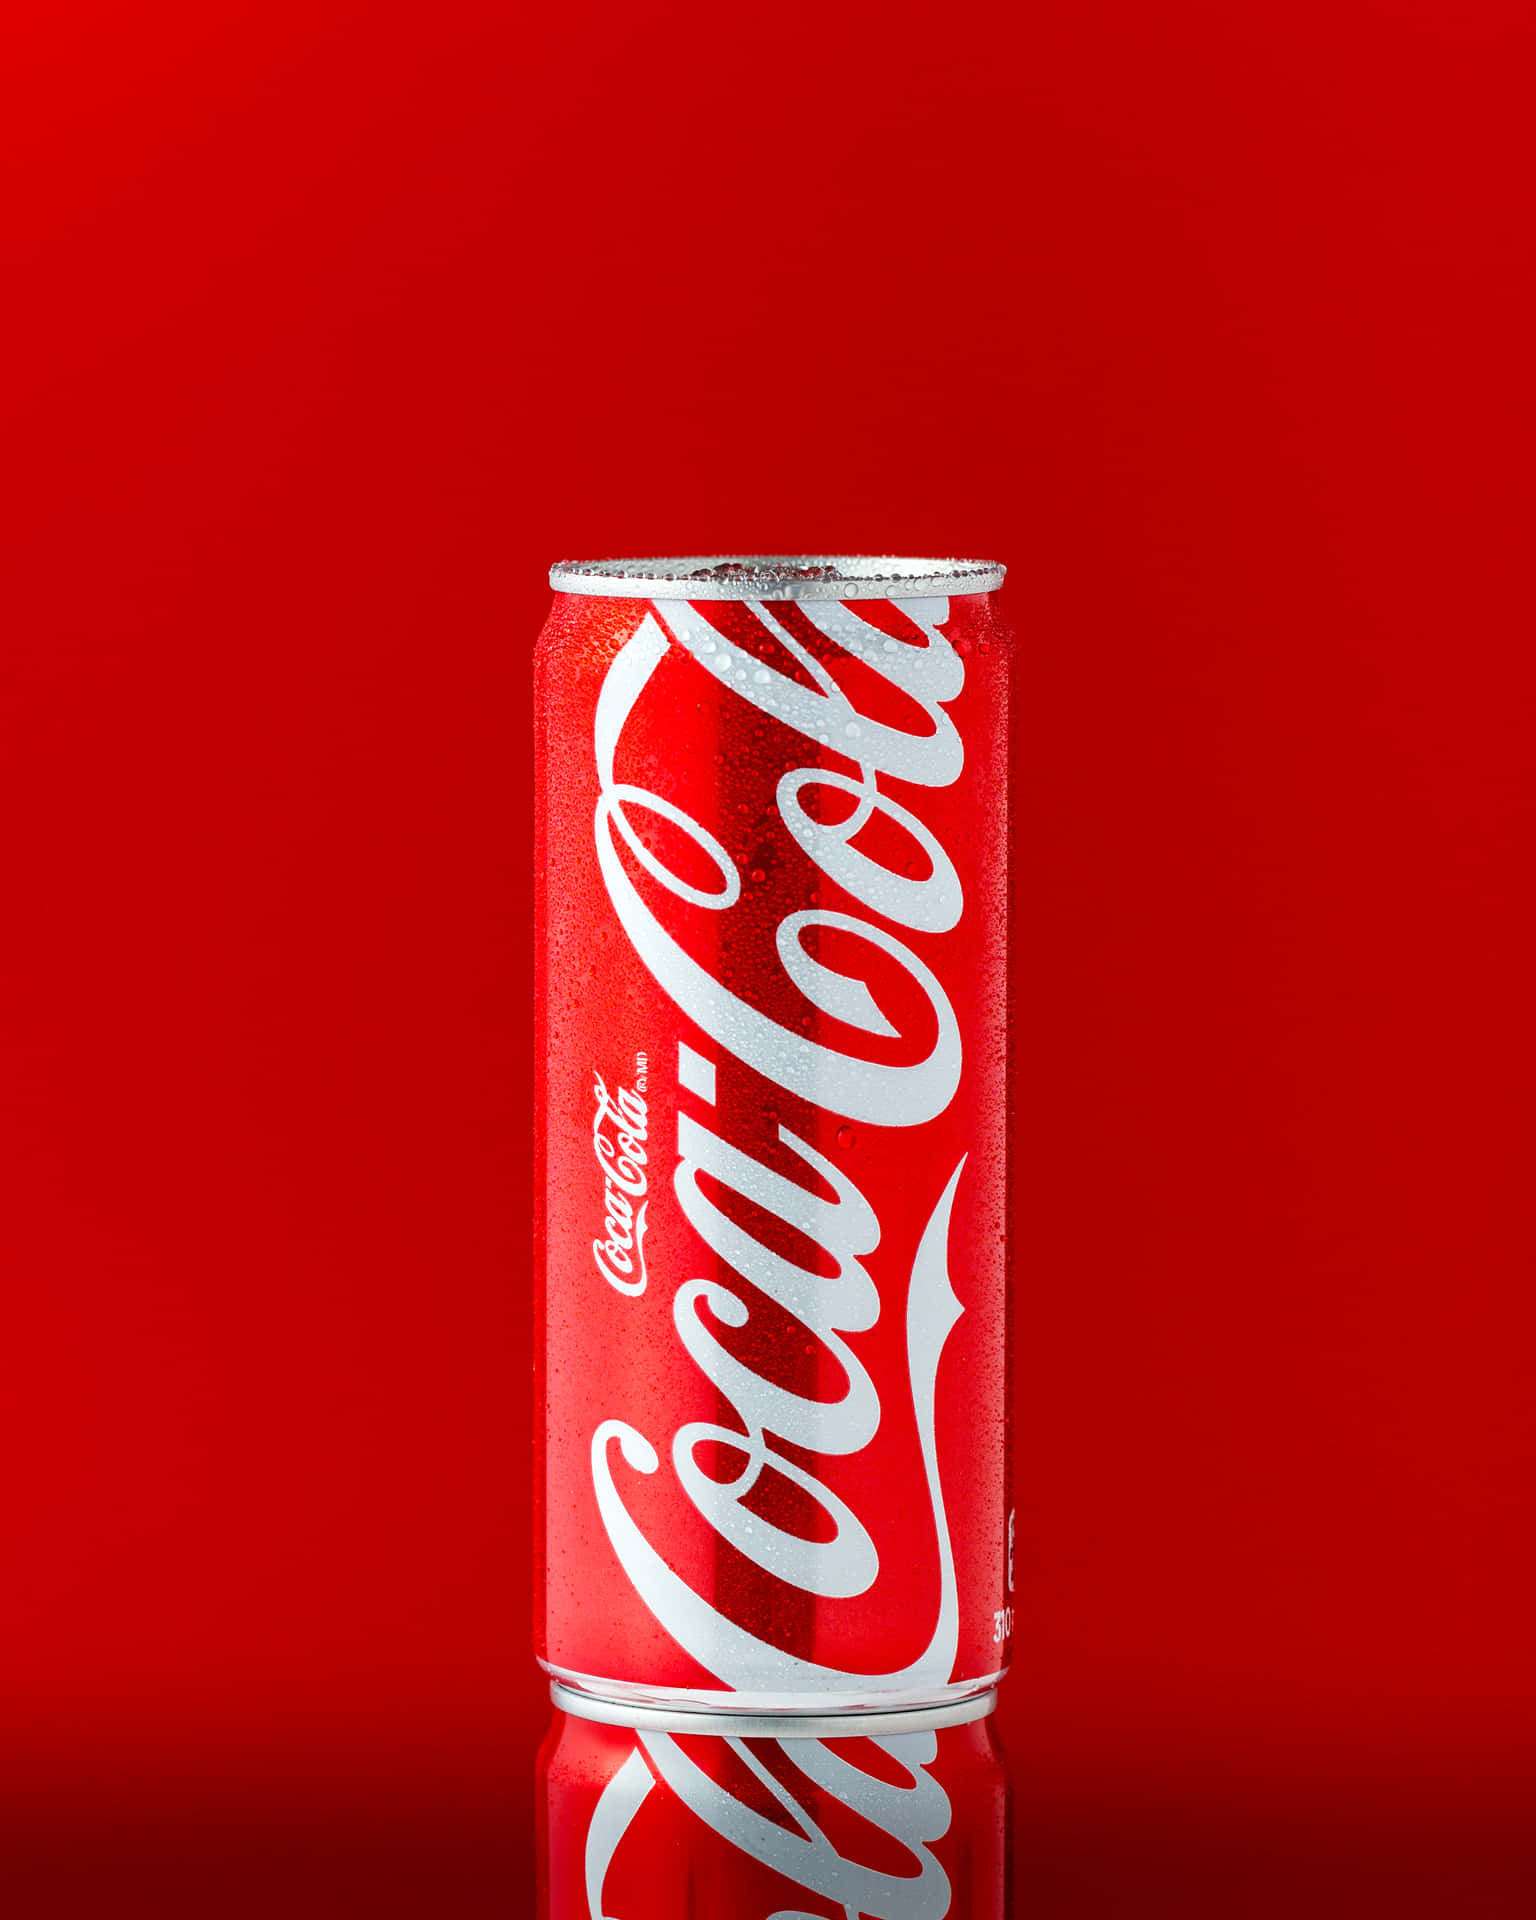 Enjoy a refreshing Coca-Cola with friends Wallpaper